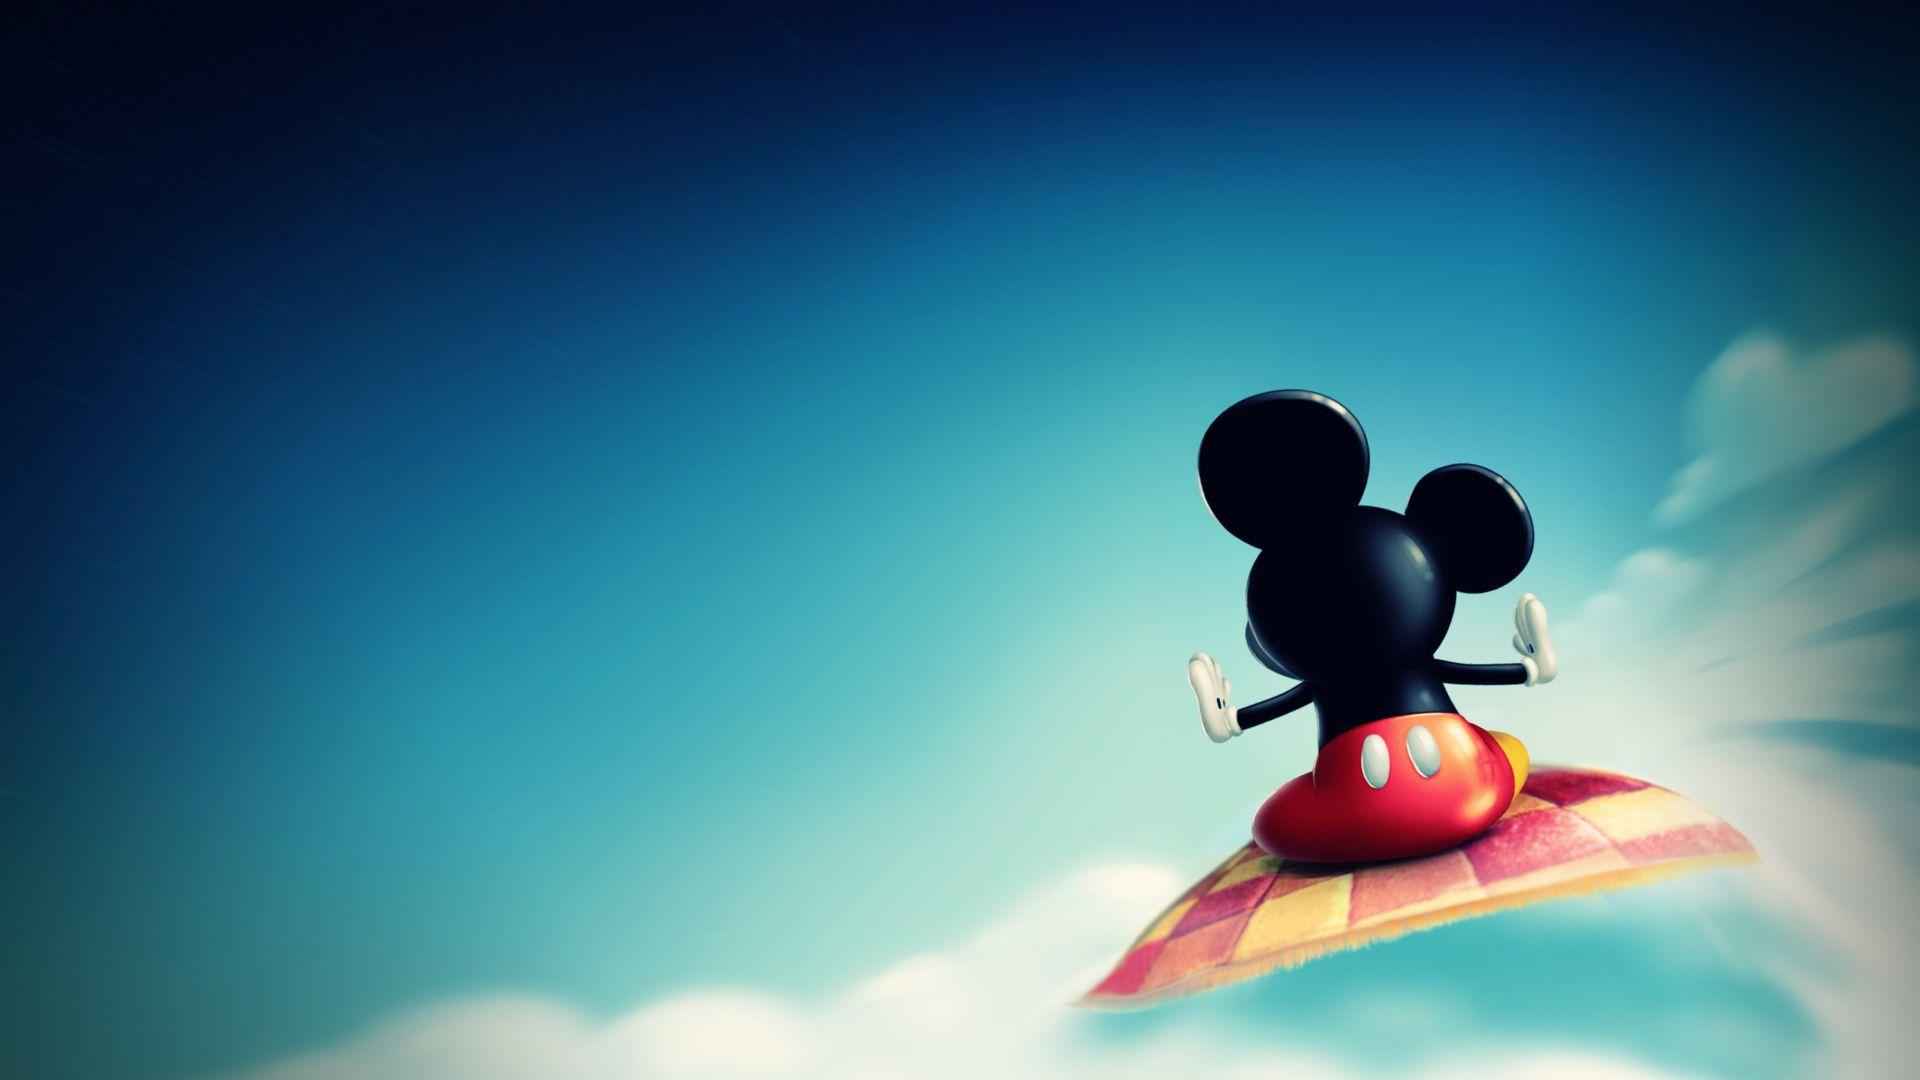 Disney Wallpaper Background. Mickey mouse wallpaper, Mickey